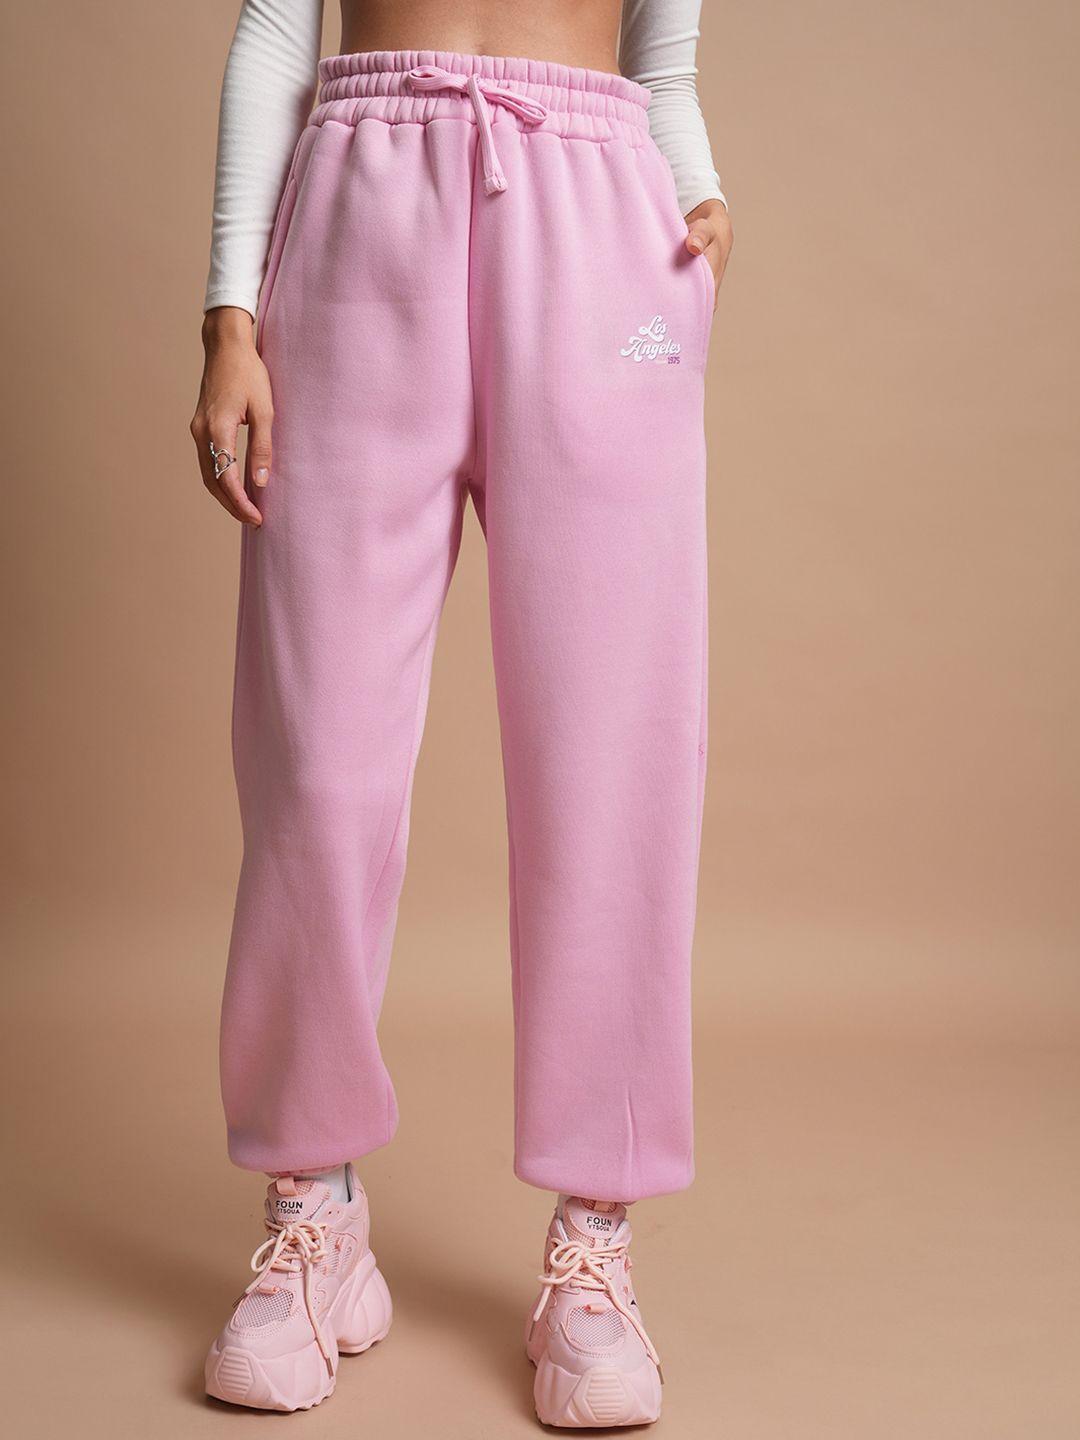 tokyo talkies women pink relaxed fit joggers